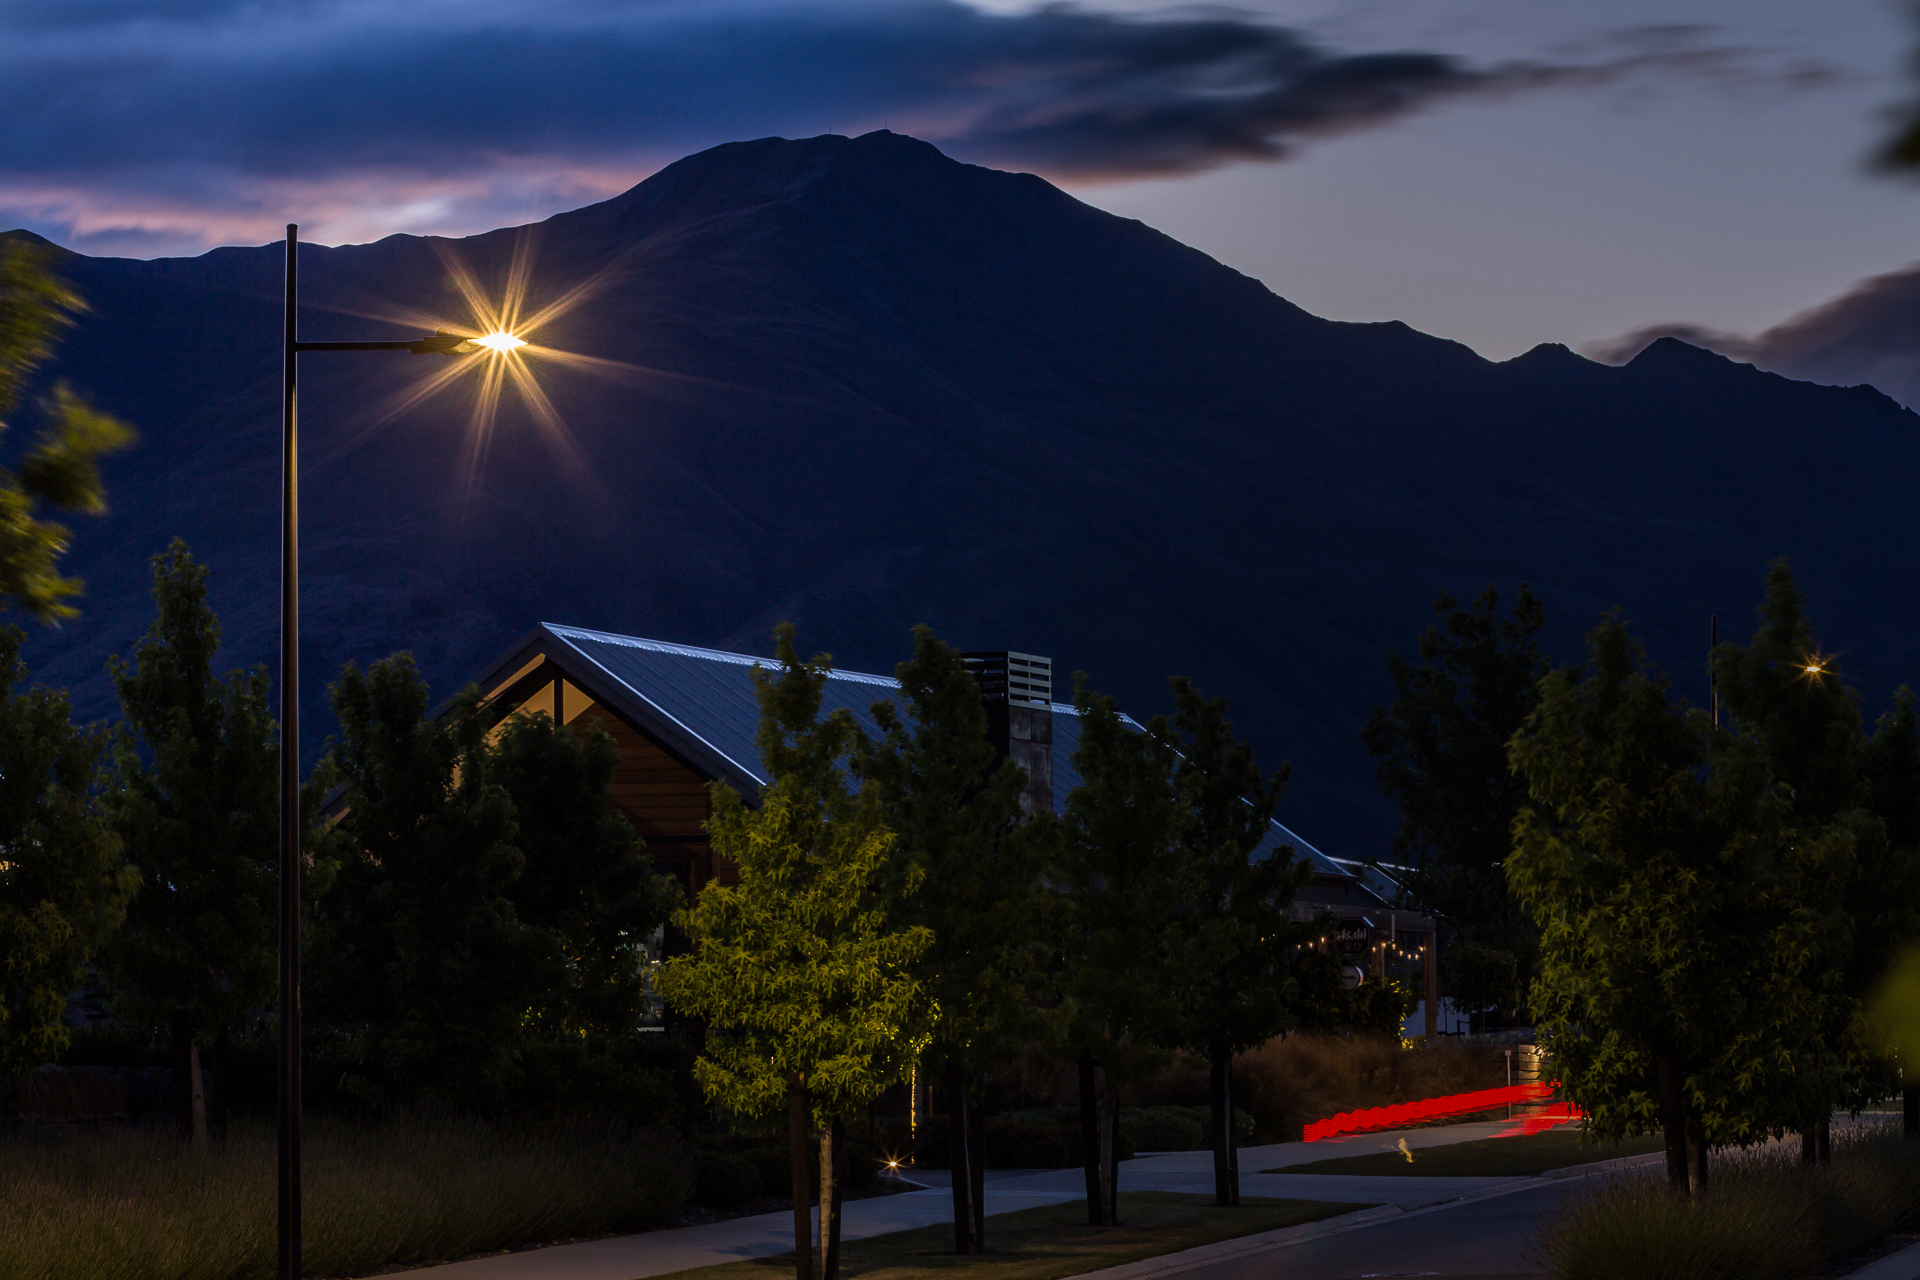 A residential street illuminated by Ibex Lighting at twilight.